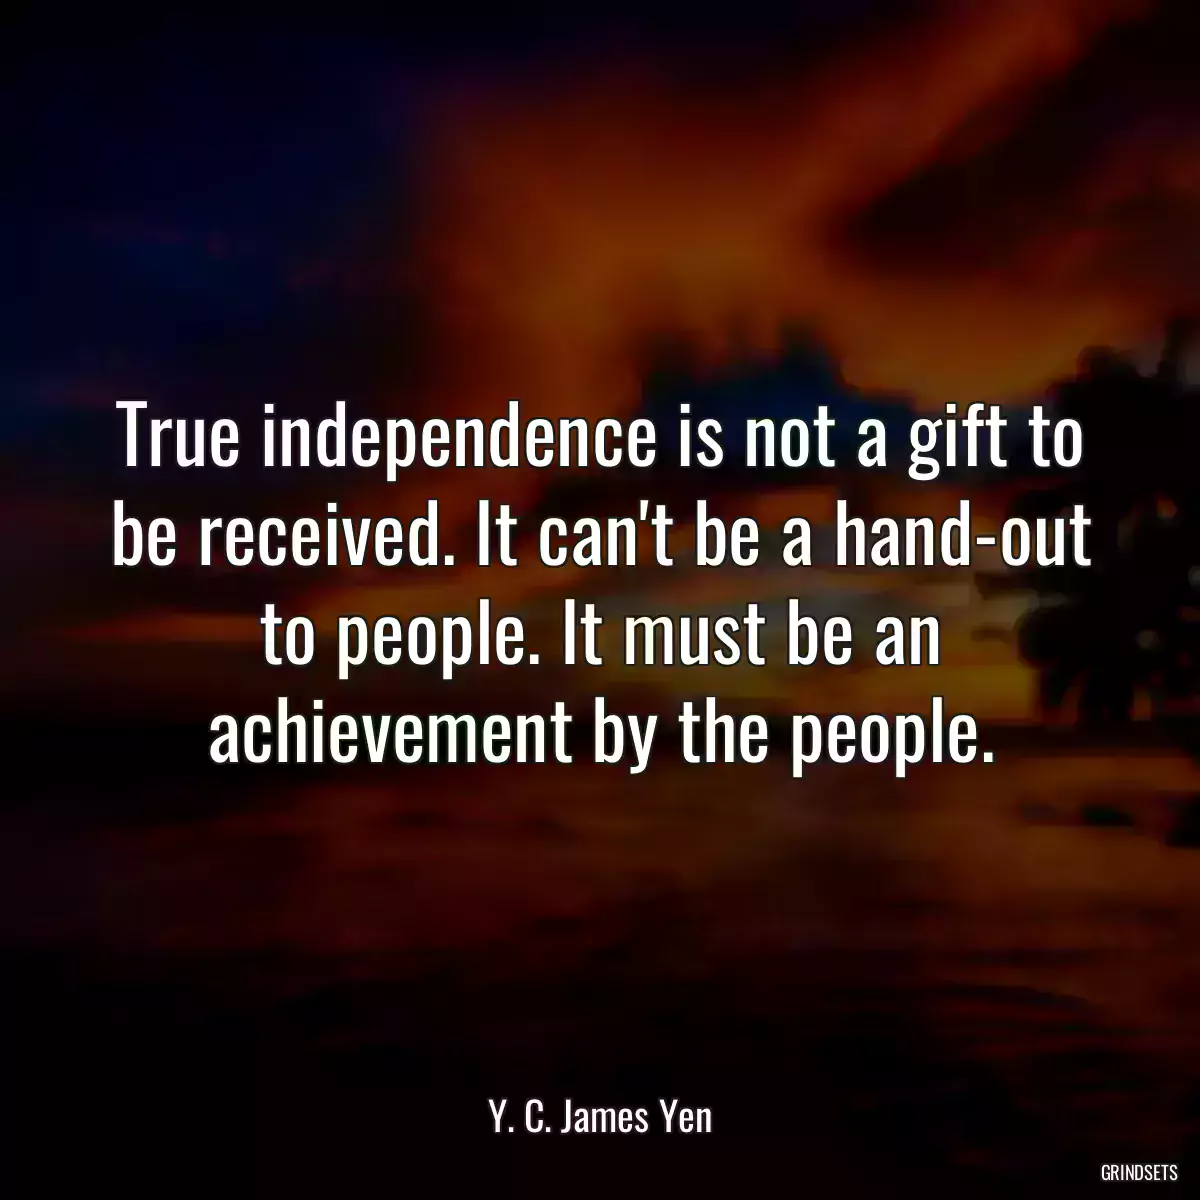 True independence is not a gift to be received. It can\'t be a hand-out to people. It must be an achievement by the people.